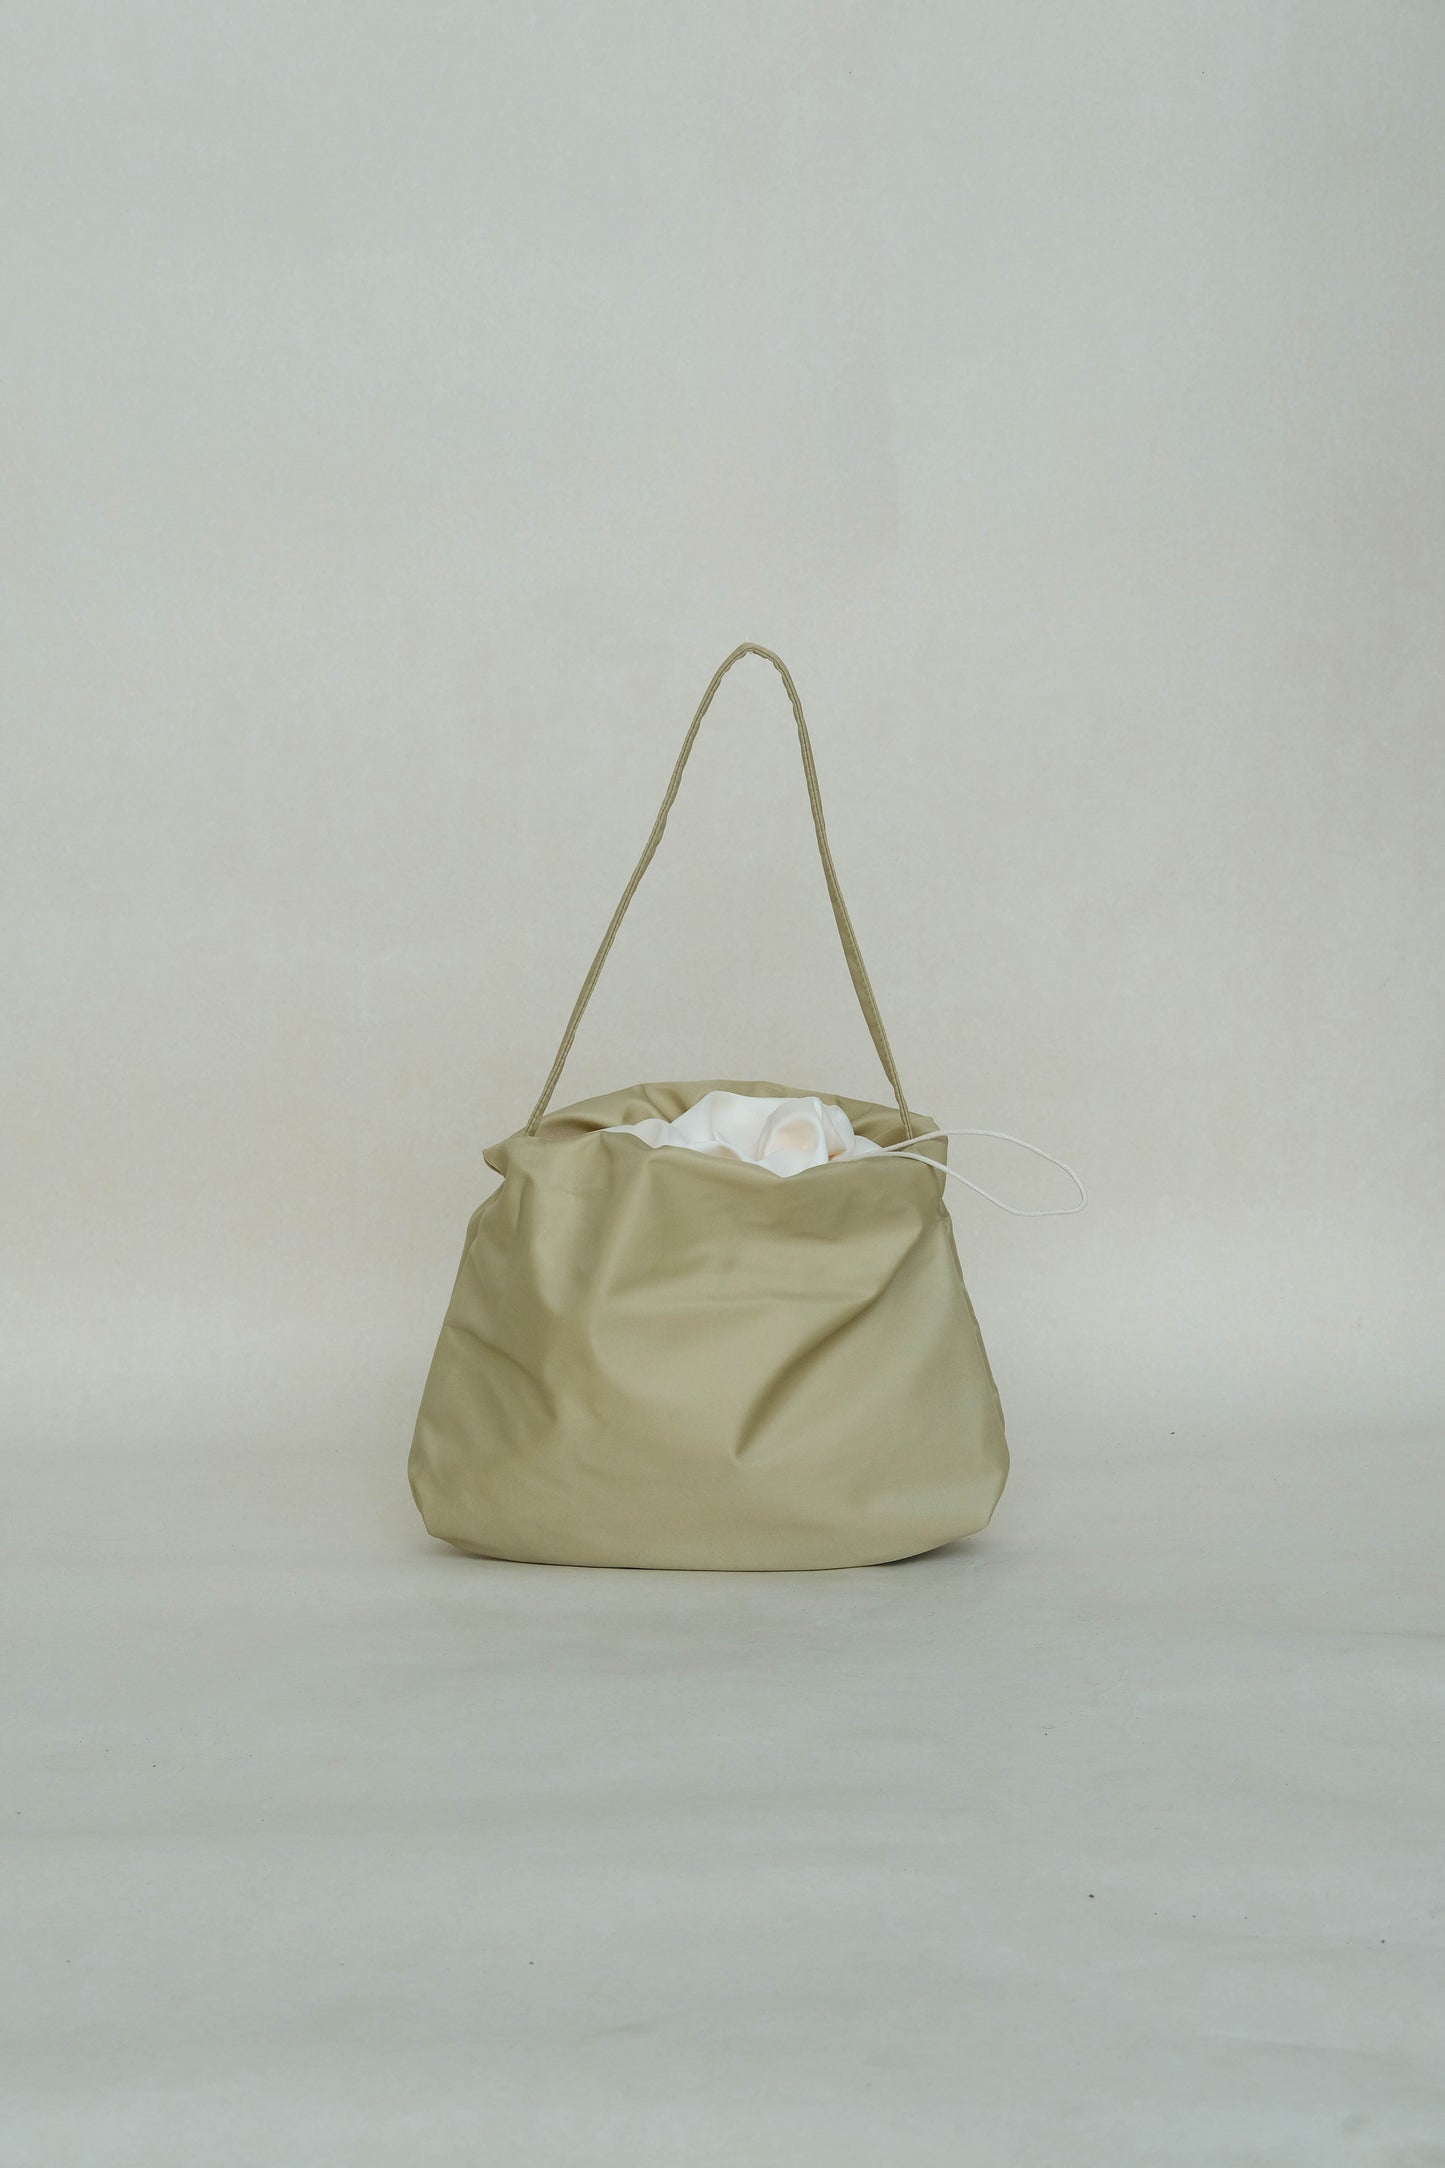 French nylon cloud pleated shoulder bag in apricot